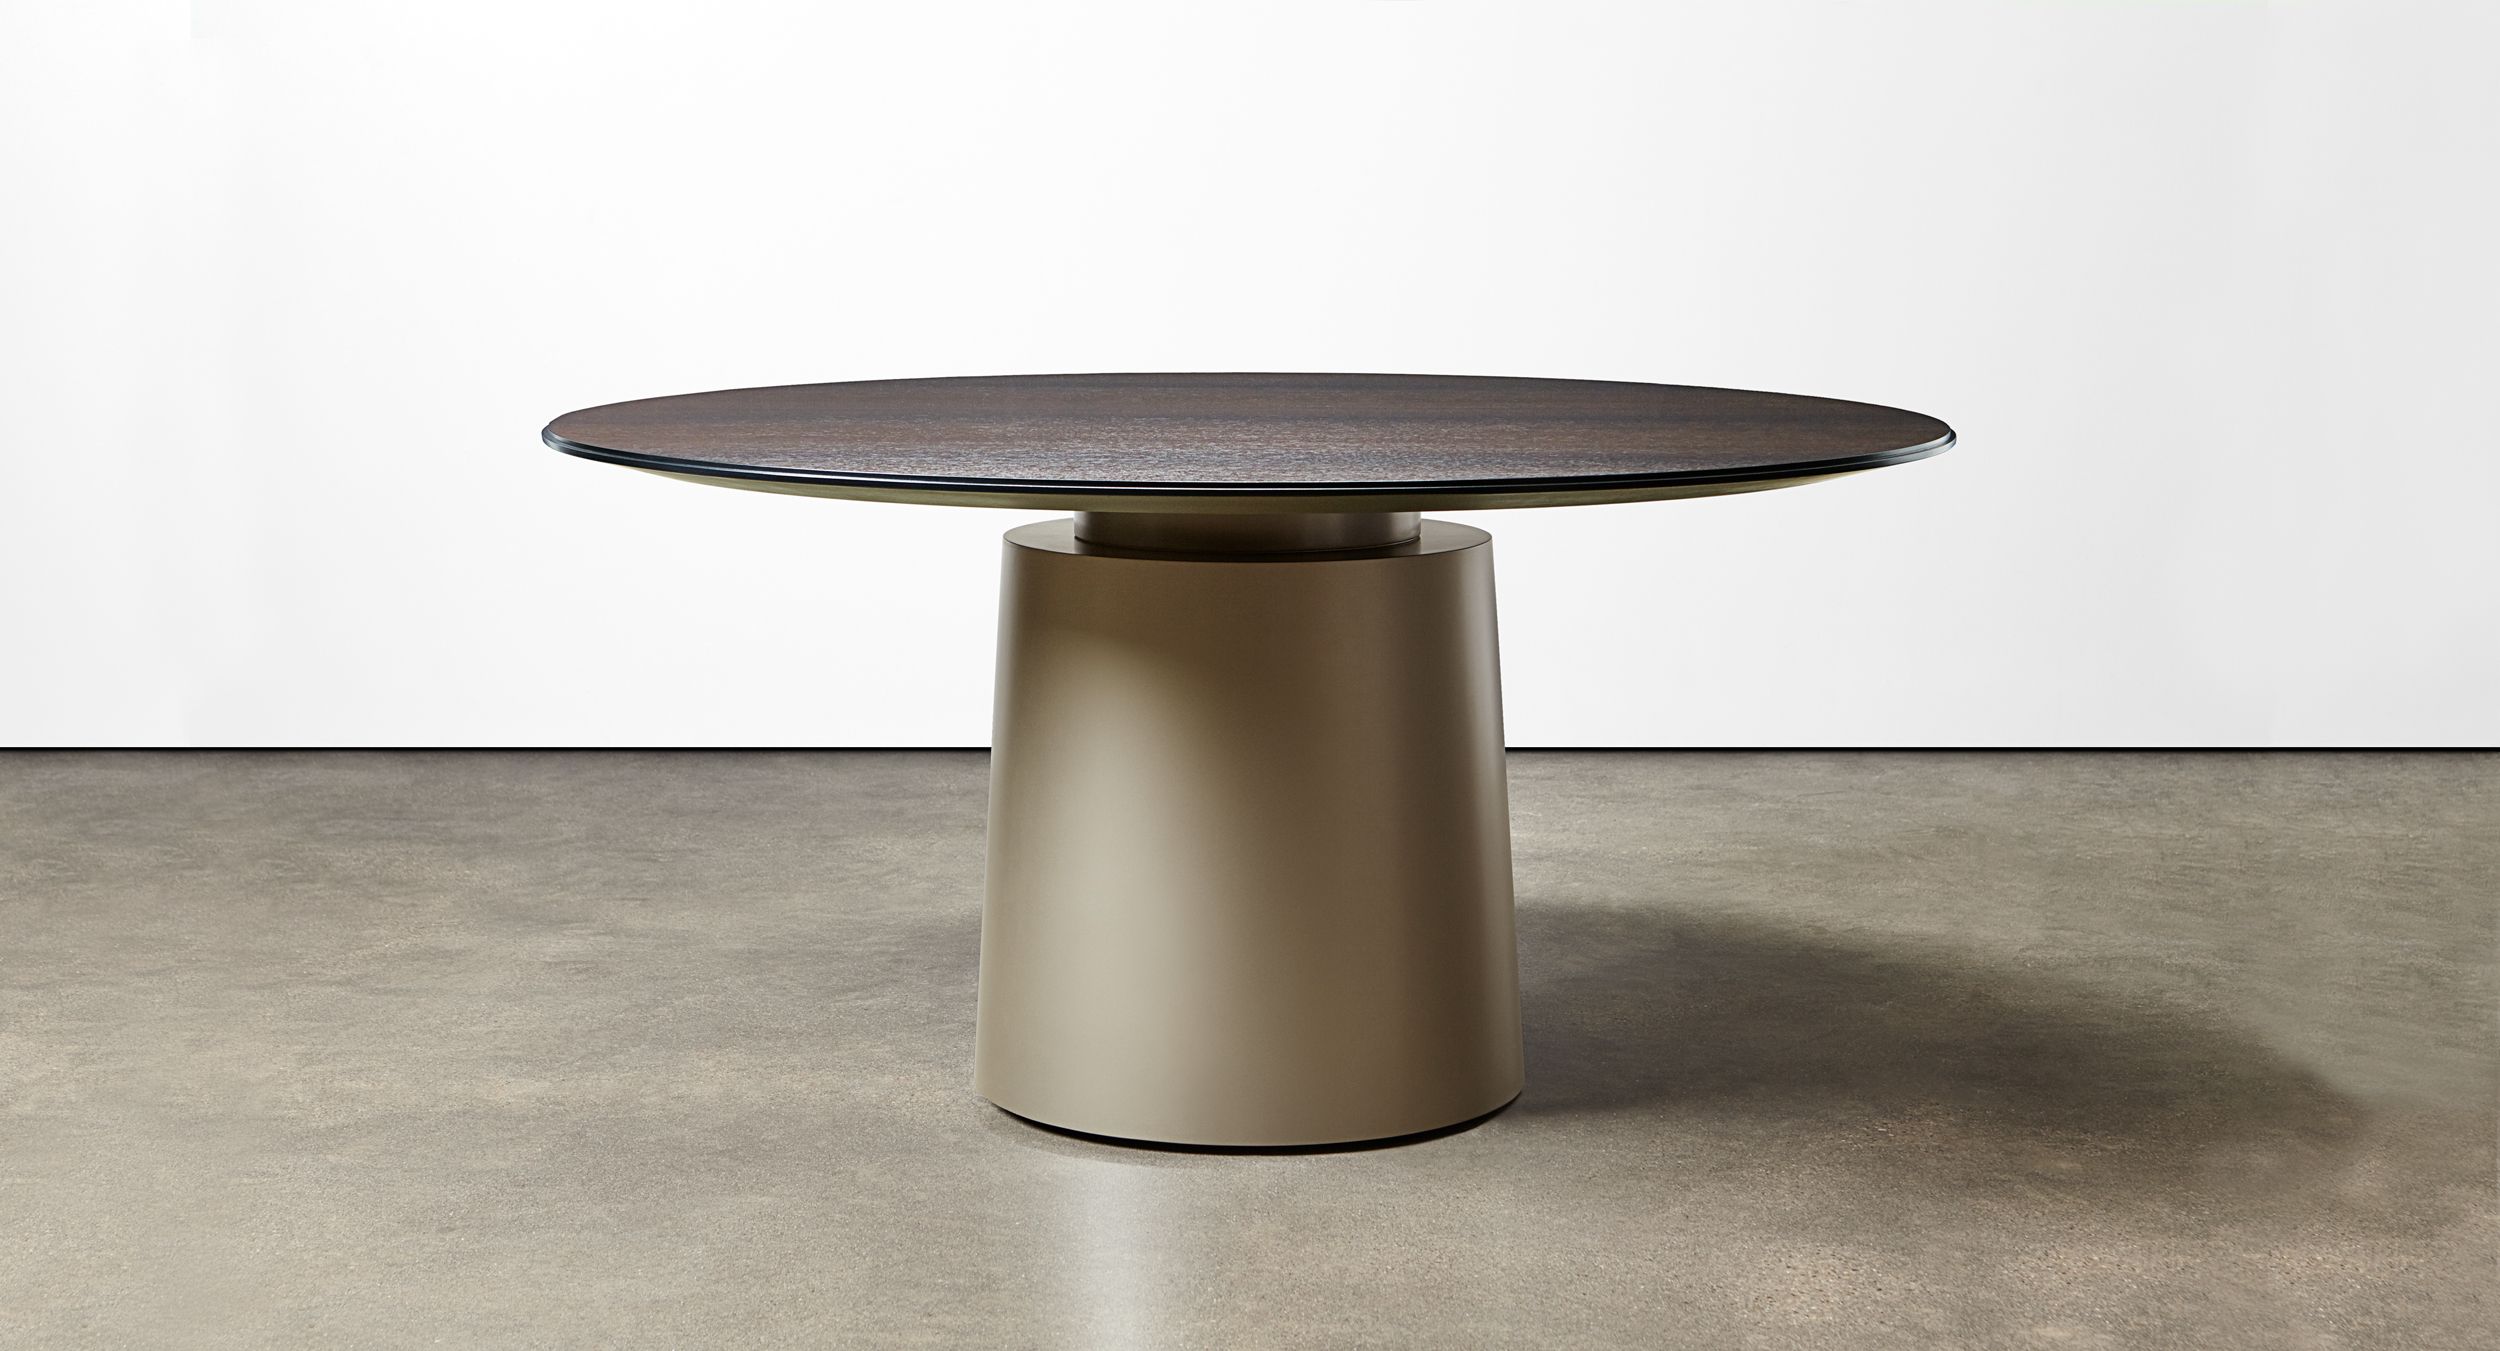 A round meeting table complements and completes the work environment.